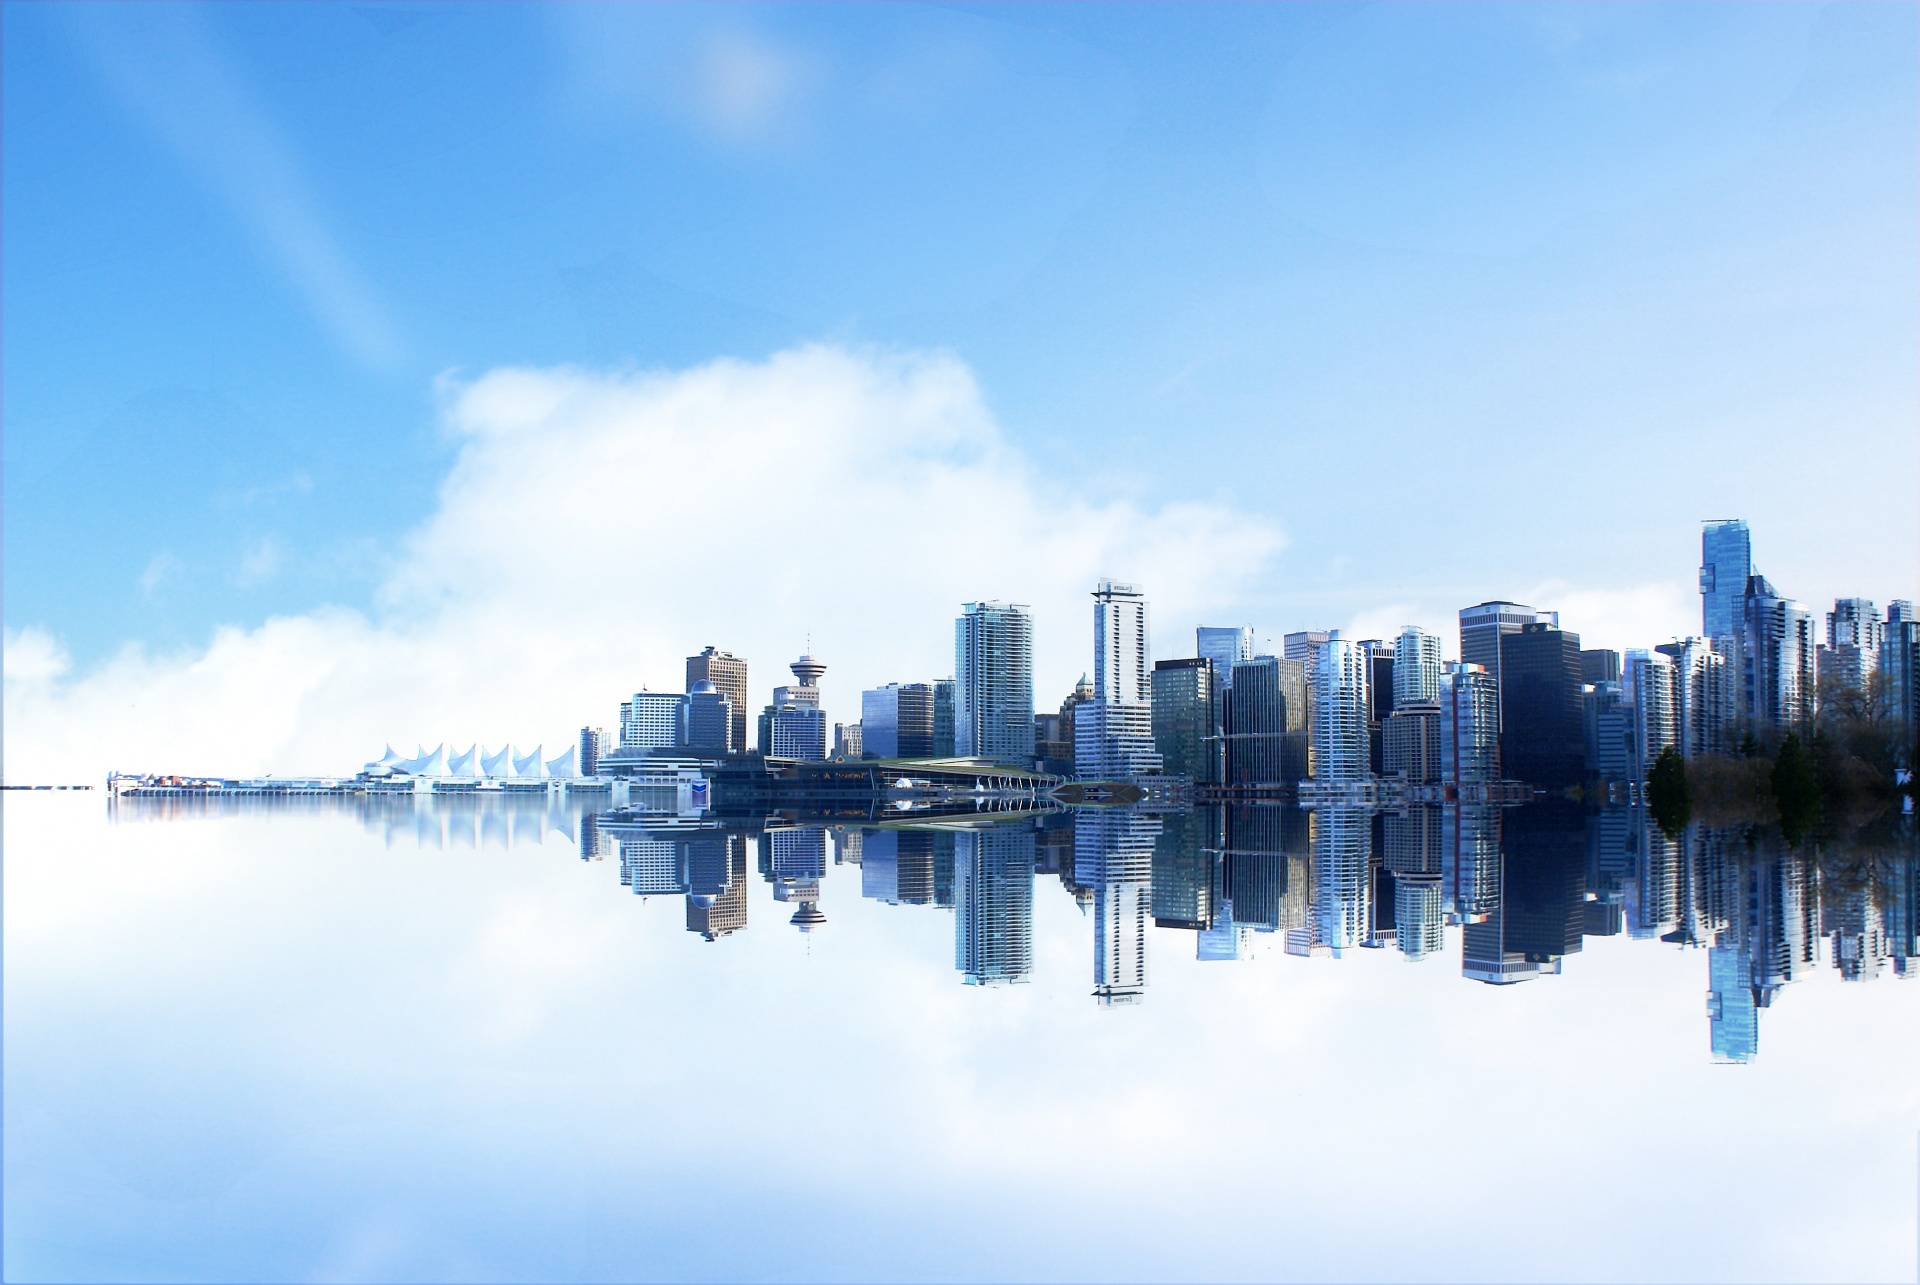 The Vancouver skyline is reflected in the harbour.